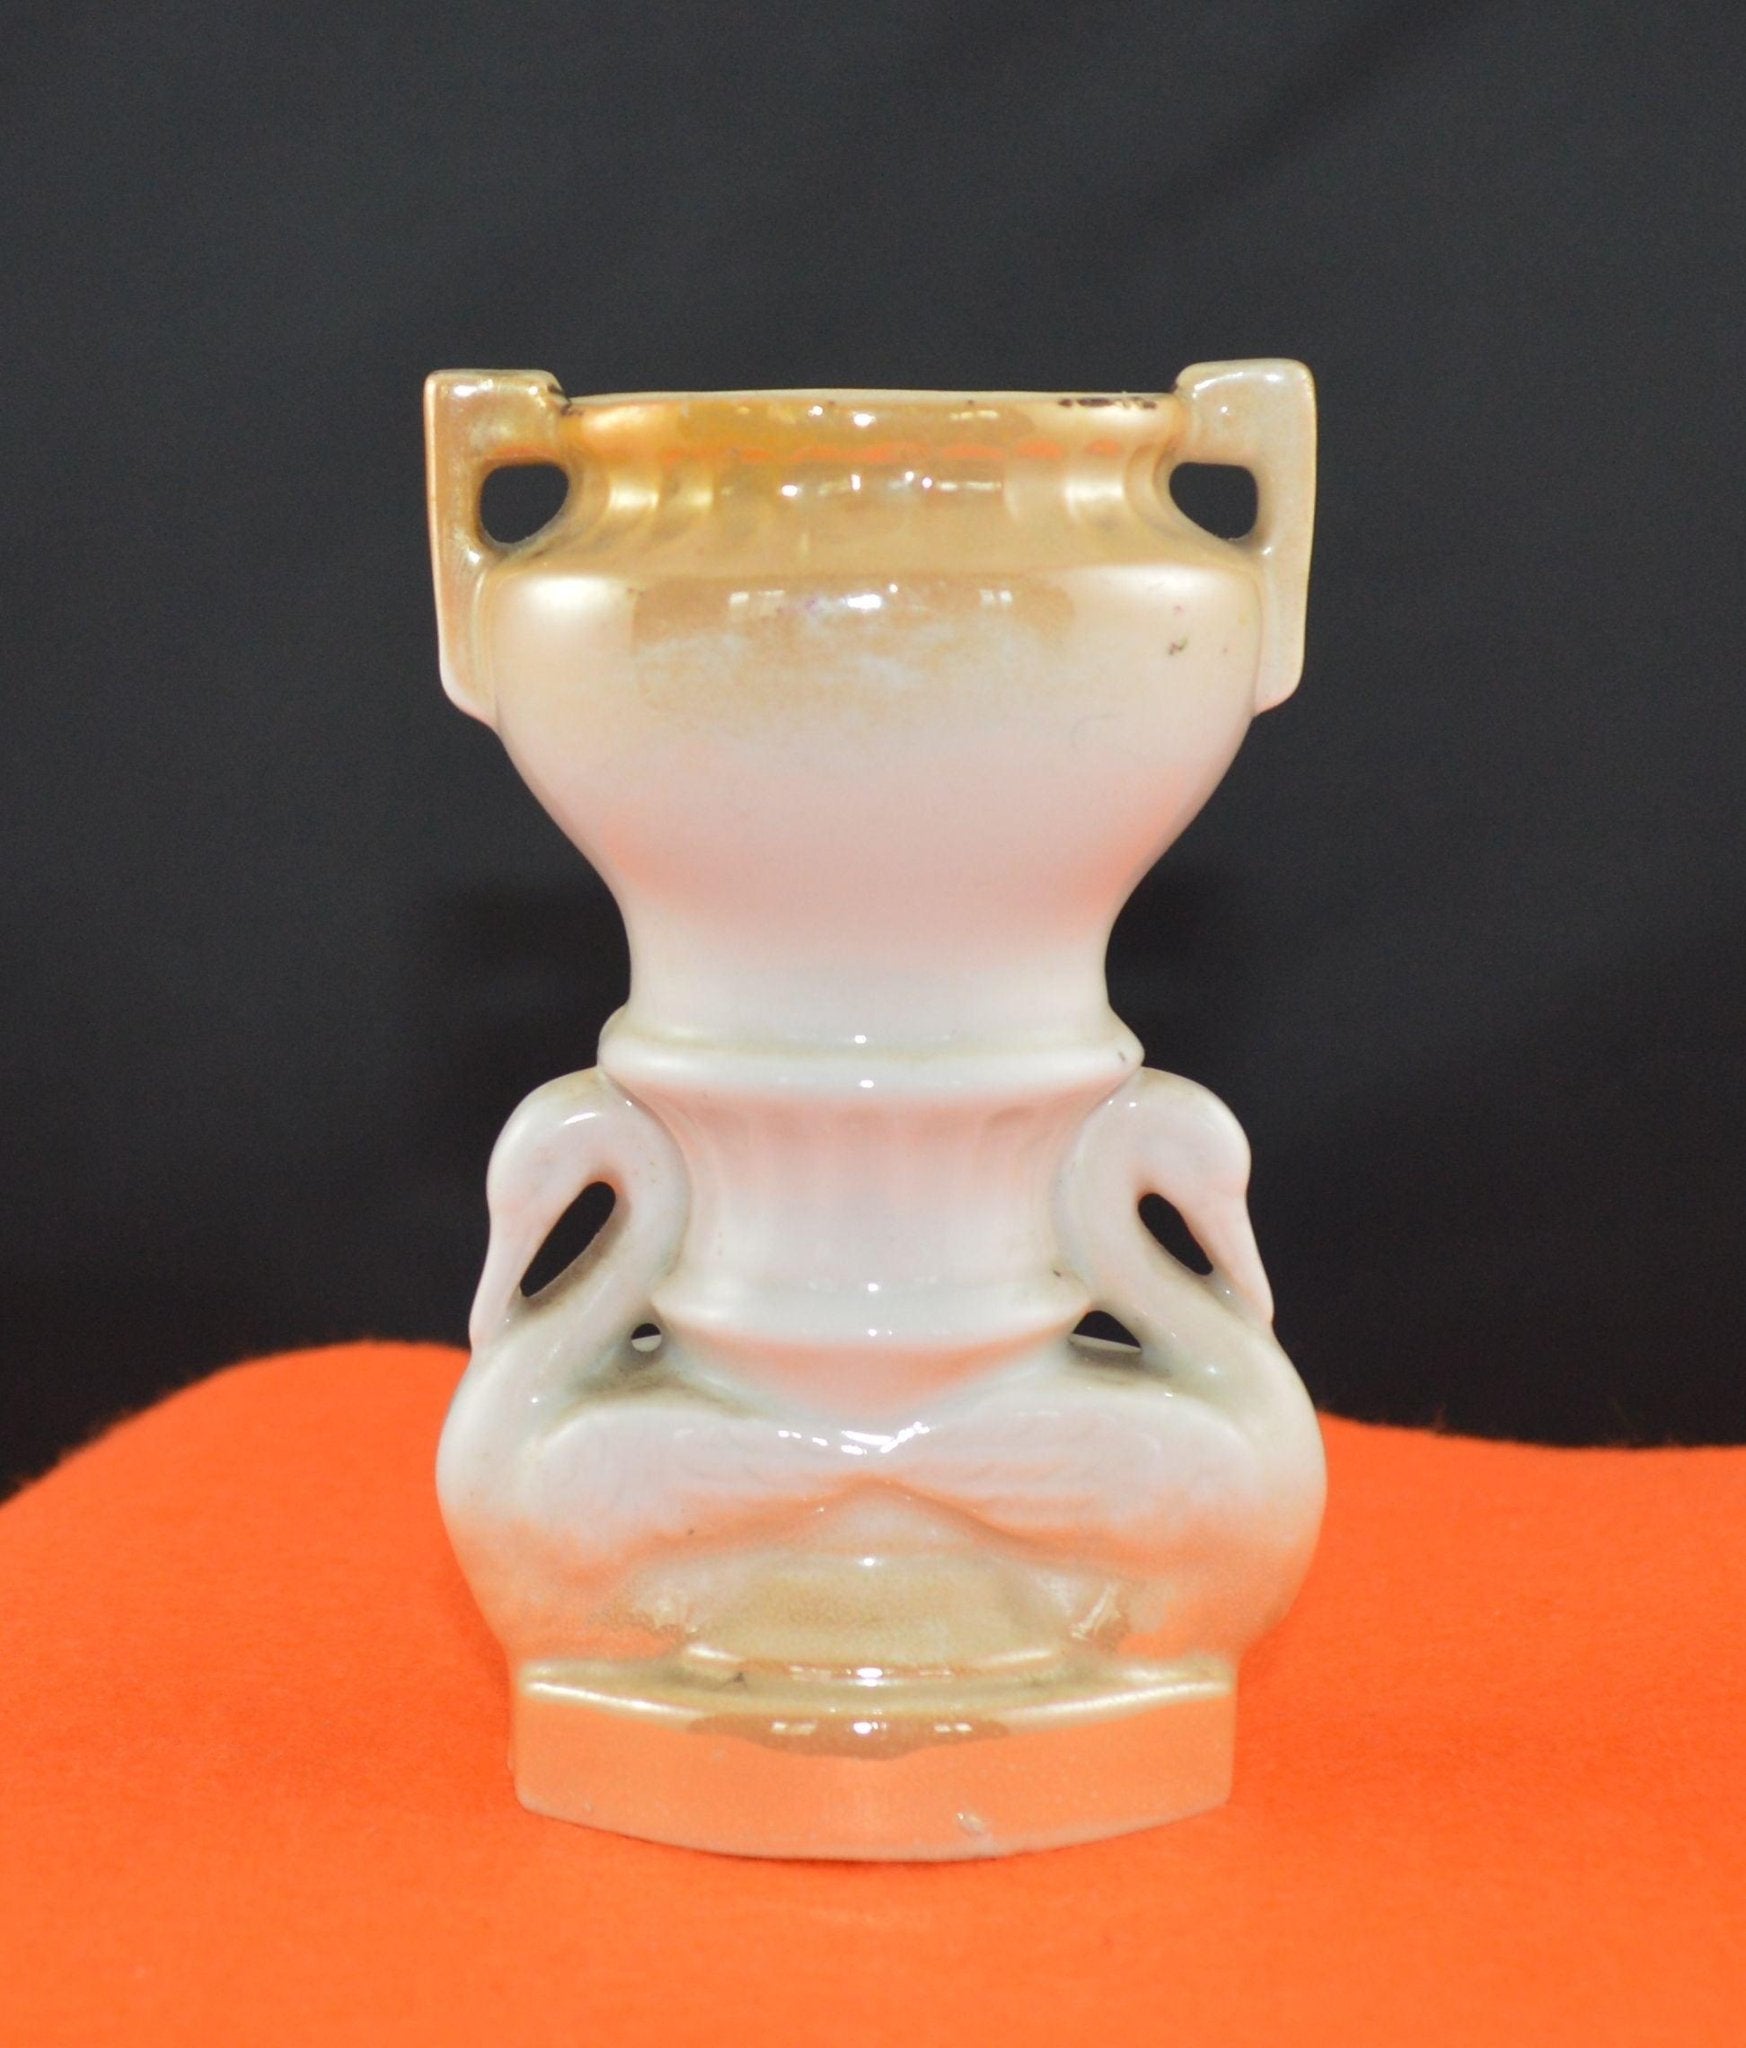 DECORATIVE ORNAMENT VERY SMALL URN VASE WITH SWAN HANDLES(PREVIOUSLY OWNED)FAIRLY GOOD CONDITION - TMD167207